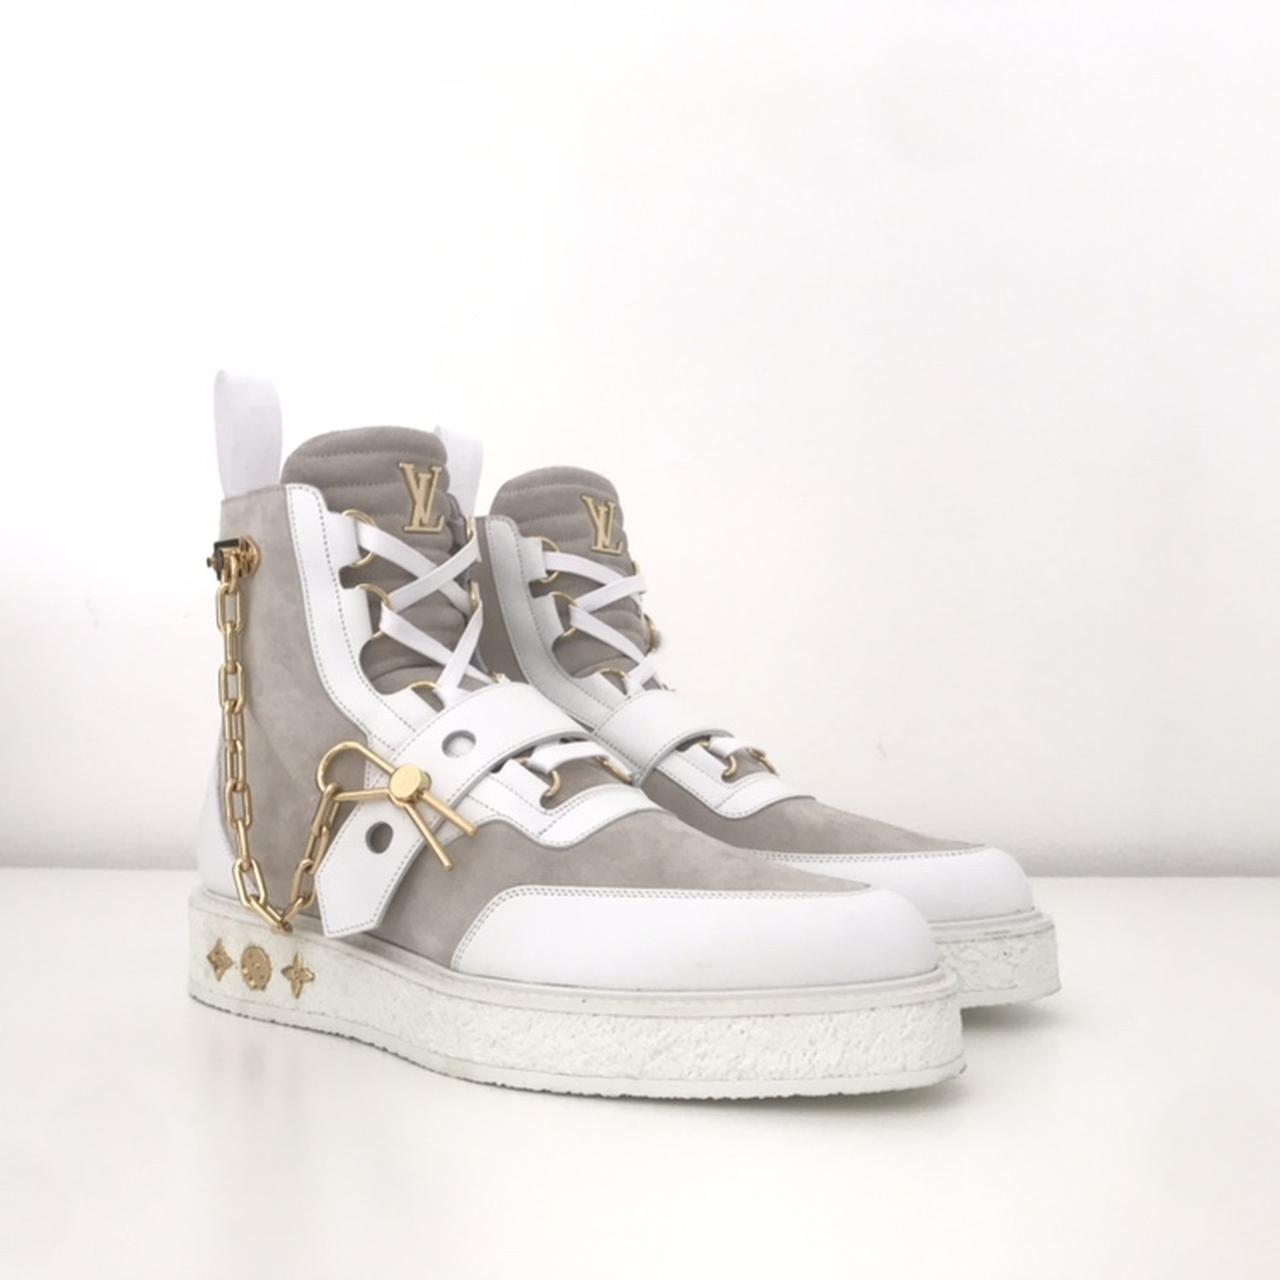 LOUIS VUITTON Lv Creeper Ankle Boot - Beige